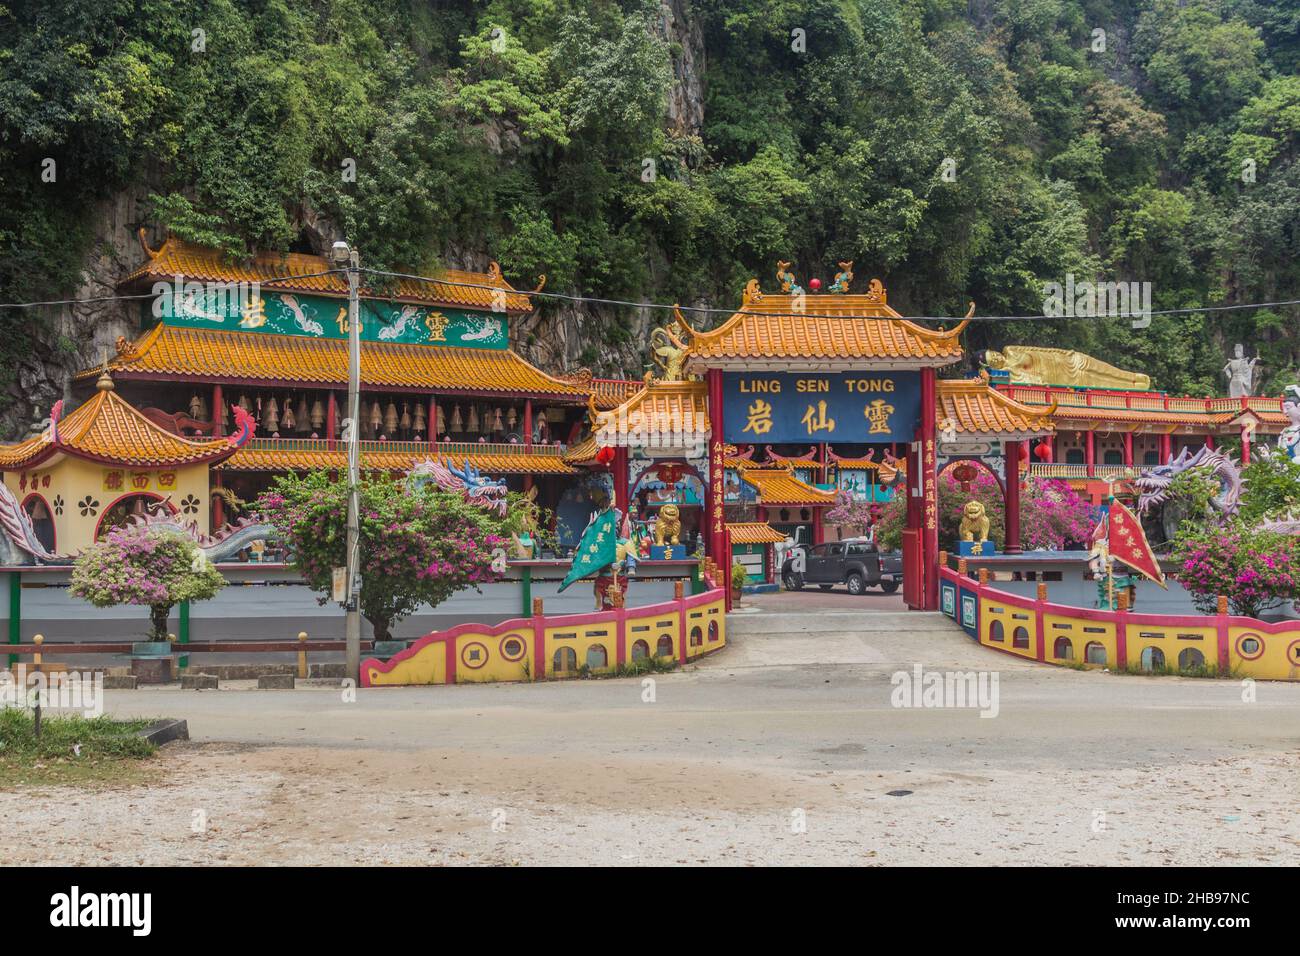 IPOH, MALAYASIA - MARCH 25, 2018: Entrance of the Ling Sen Tong Temple in Ipoh, Malaysia. Stock Photo